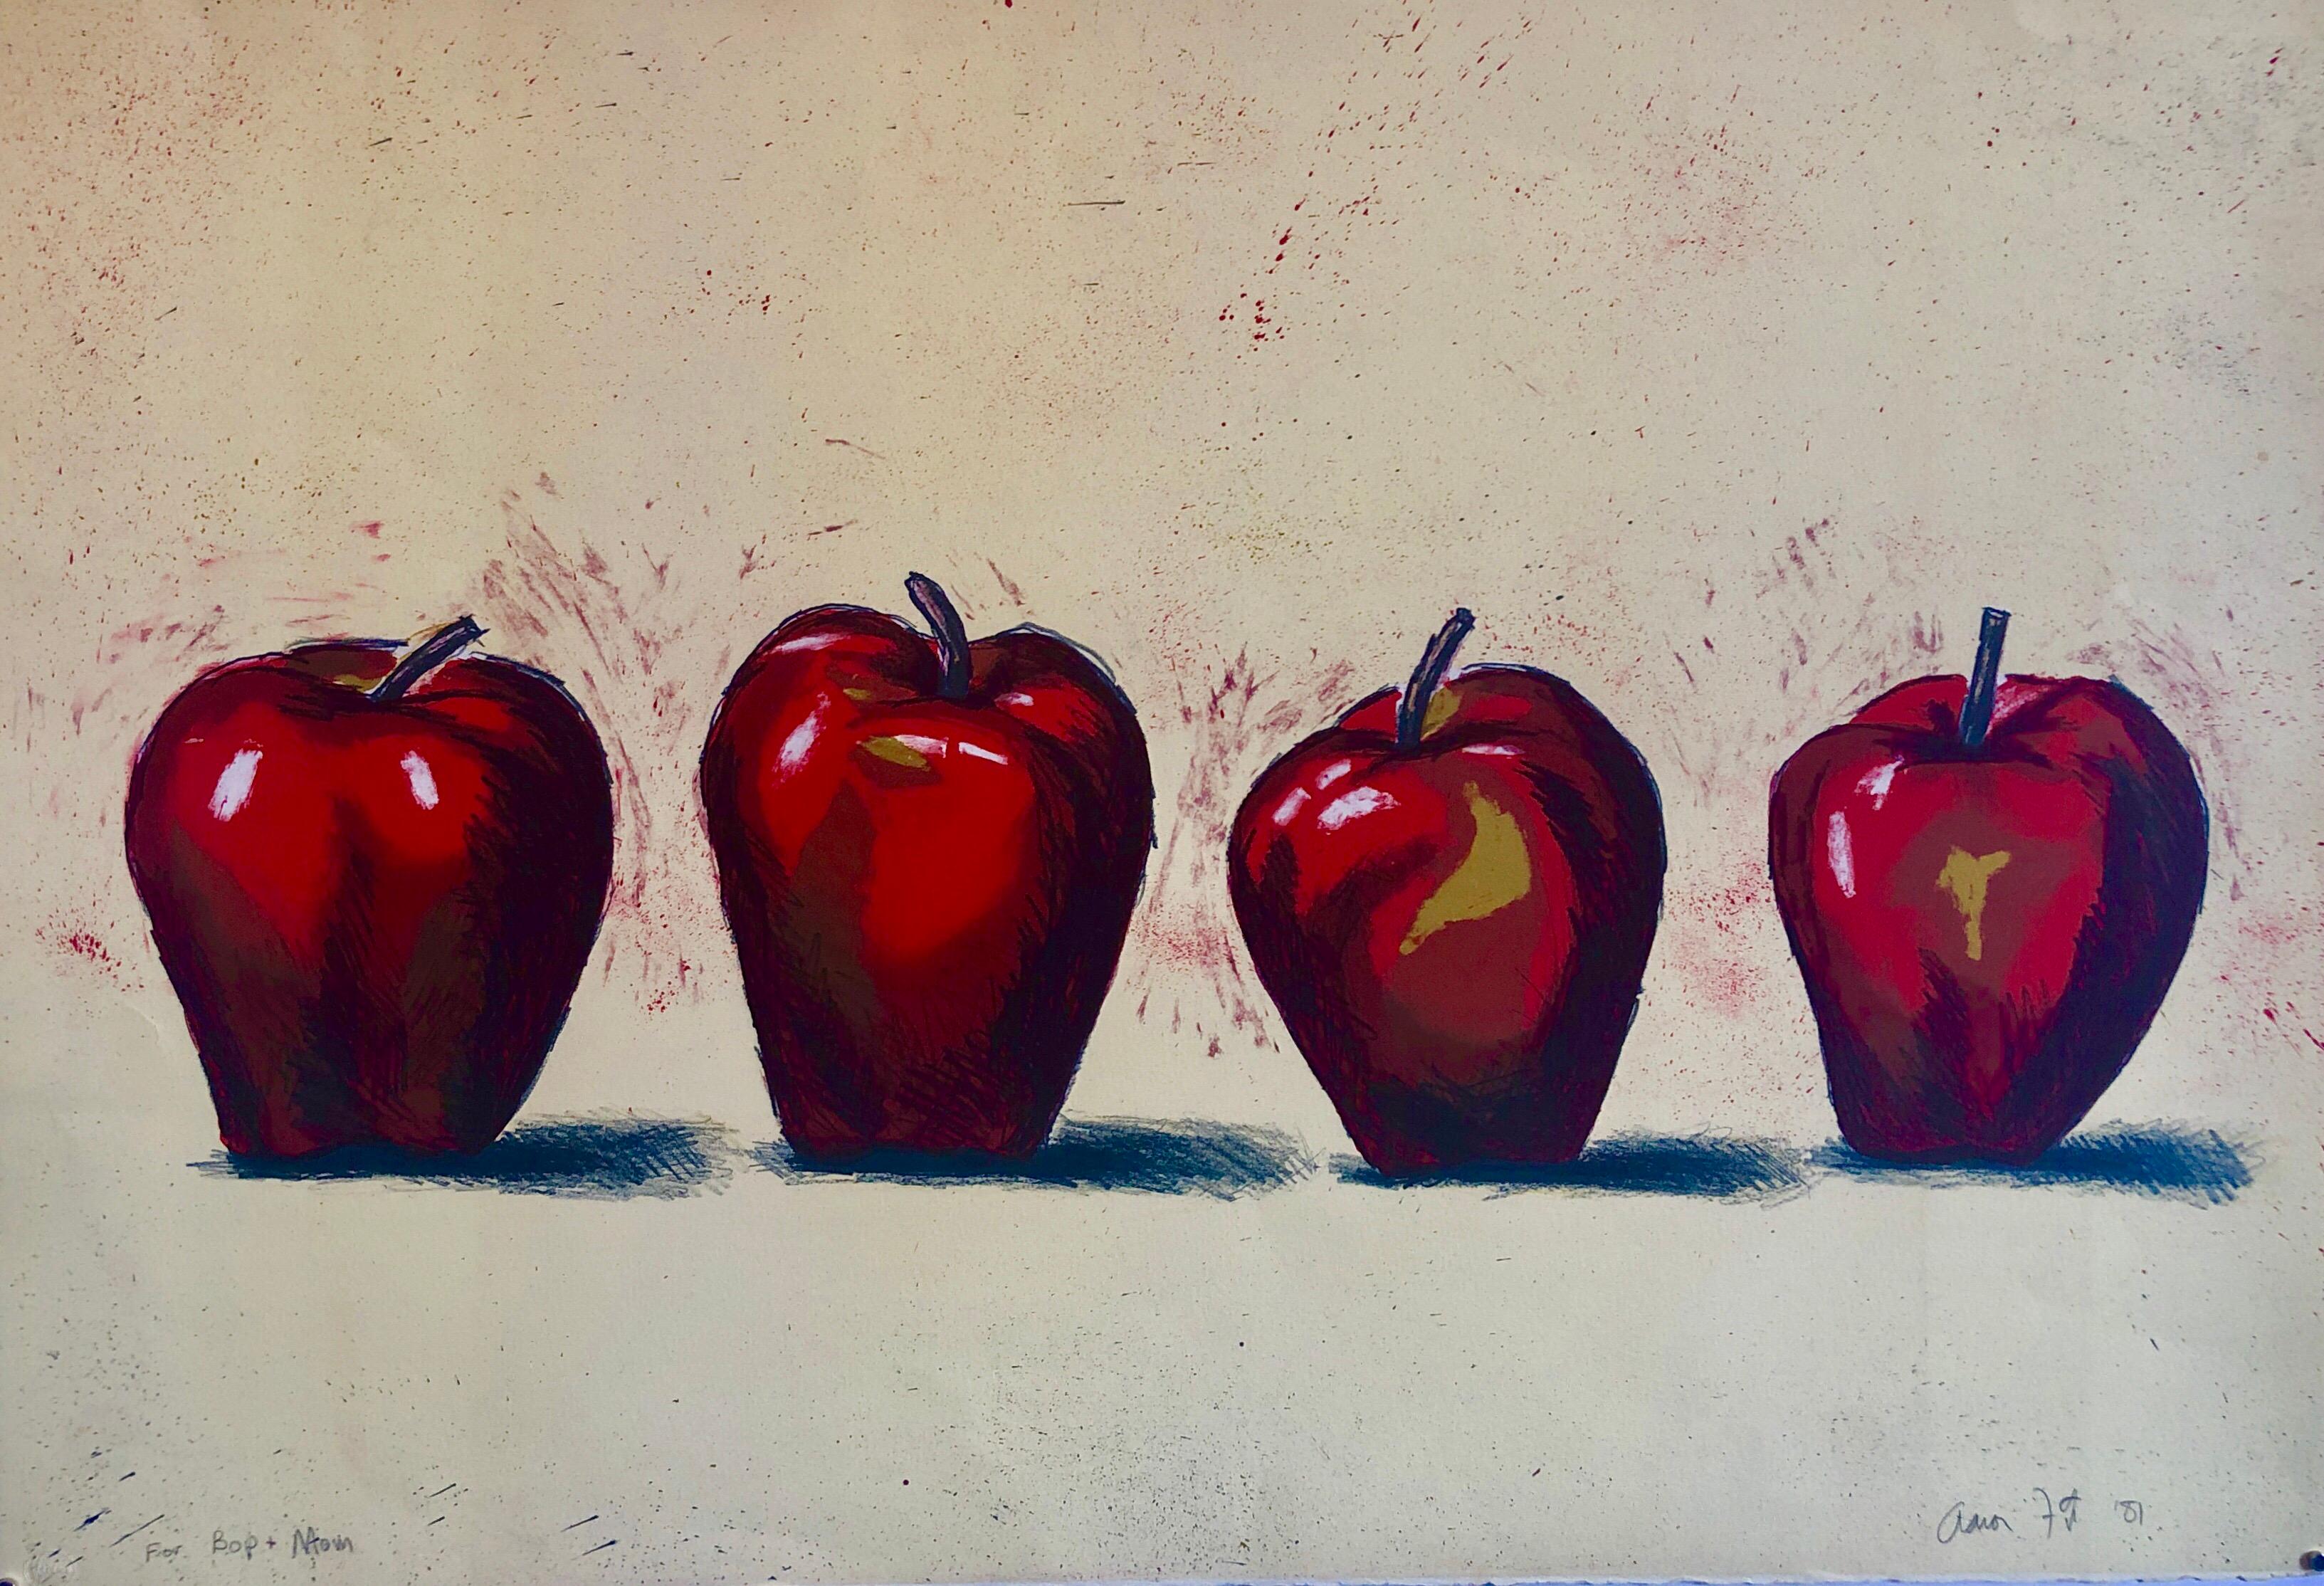 Aaron Fink (American, b. 1955) 
Apples
Signed and dated "Aaron Fink" lower right
on Arches deckle edged paper. it is pencil signed and dedicated in pencil. it is not numbered and might be a rare artist's proof print. (this is possibly a woodblock or